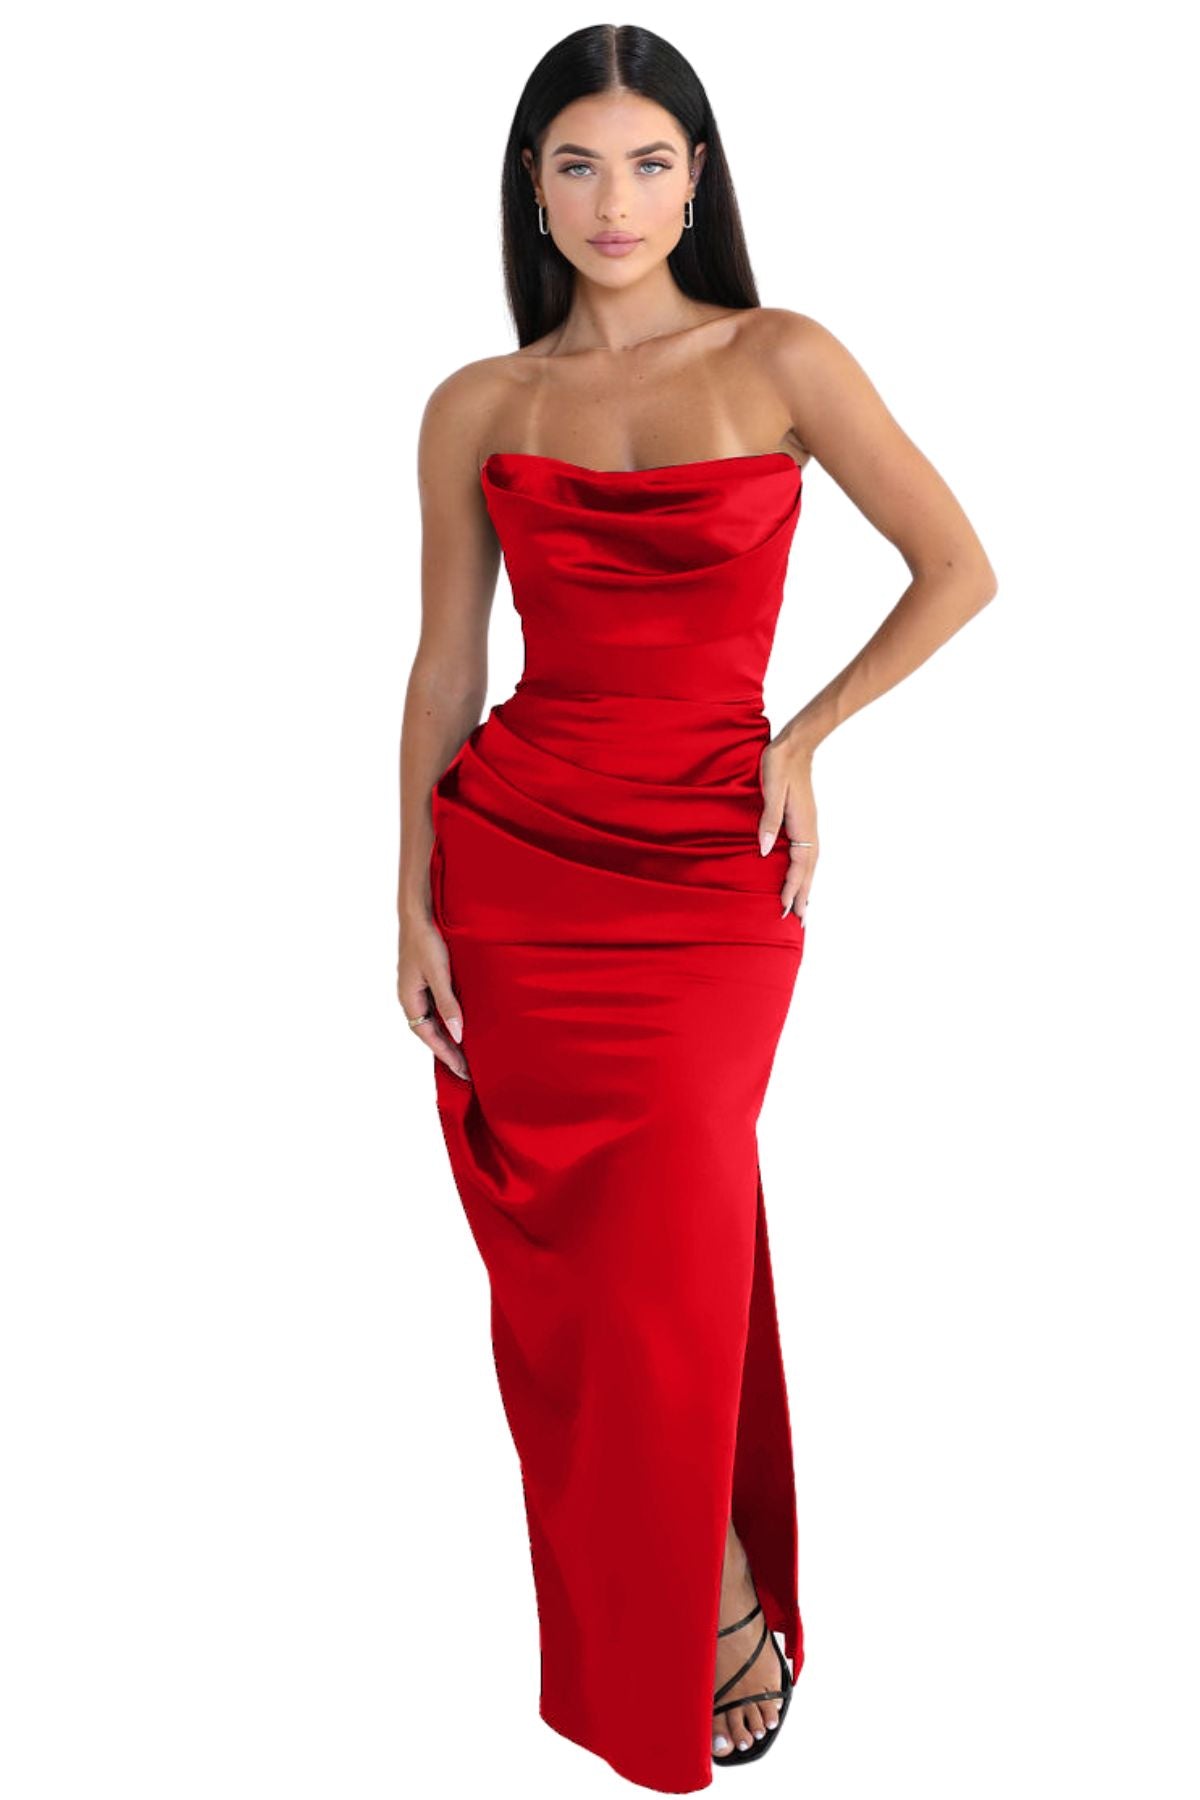 HOUSE OF CB Charmaine Corset Gown (Black) - RRP $389